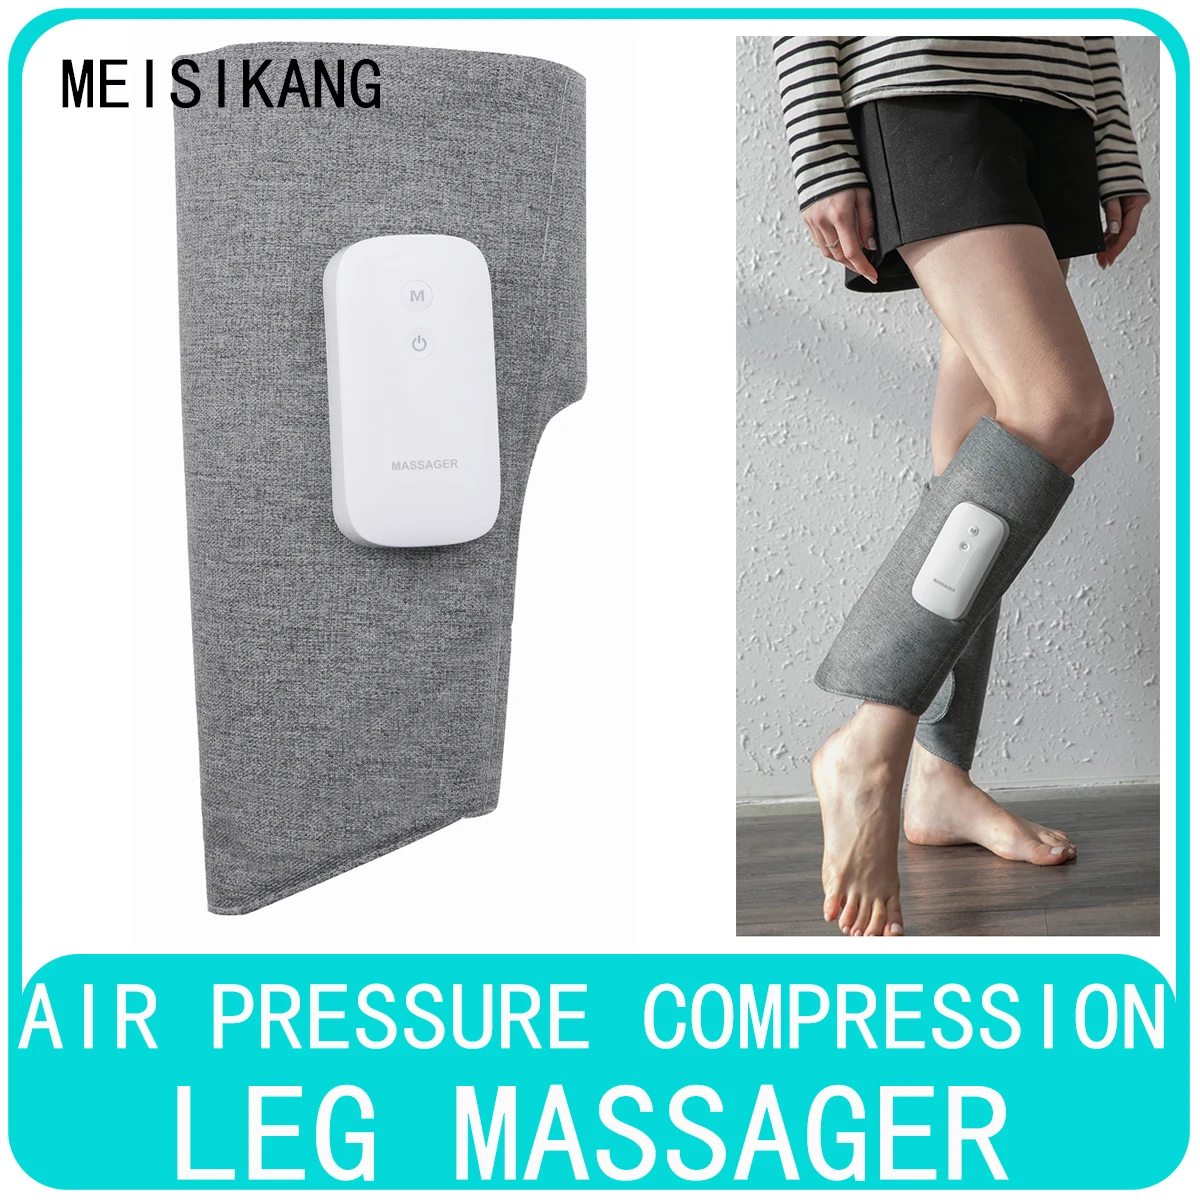 MEISIKANG Air Pressure Foot Leg Calf Relax Compression Massager For Circulation With Heating Muscle Feet Massage Pressotherapy